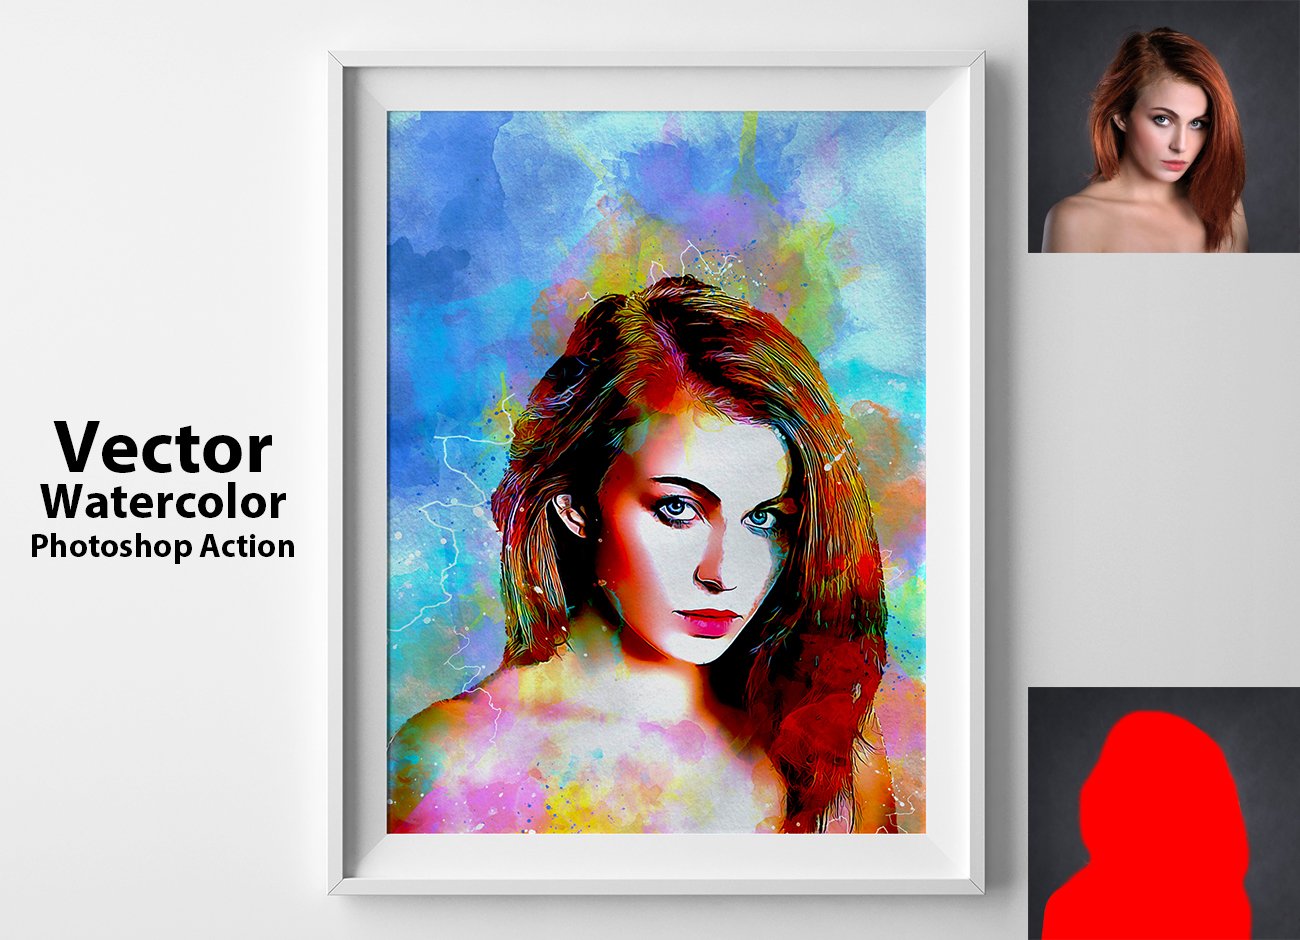 Vector Watercolor Photoshop Actioncover image.